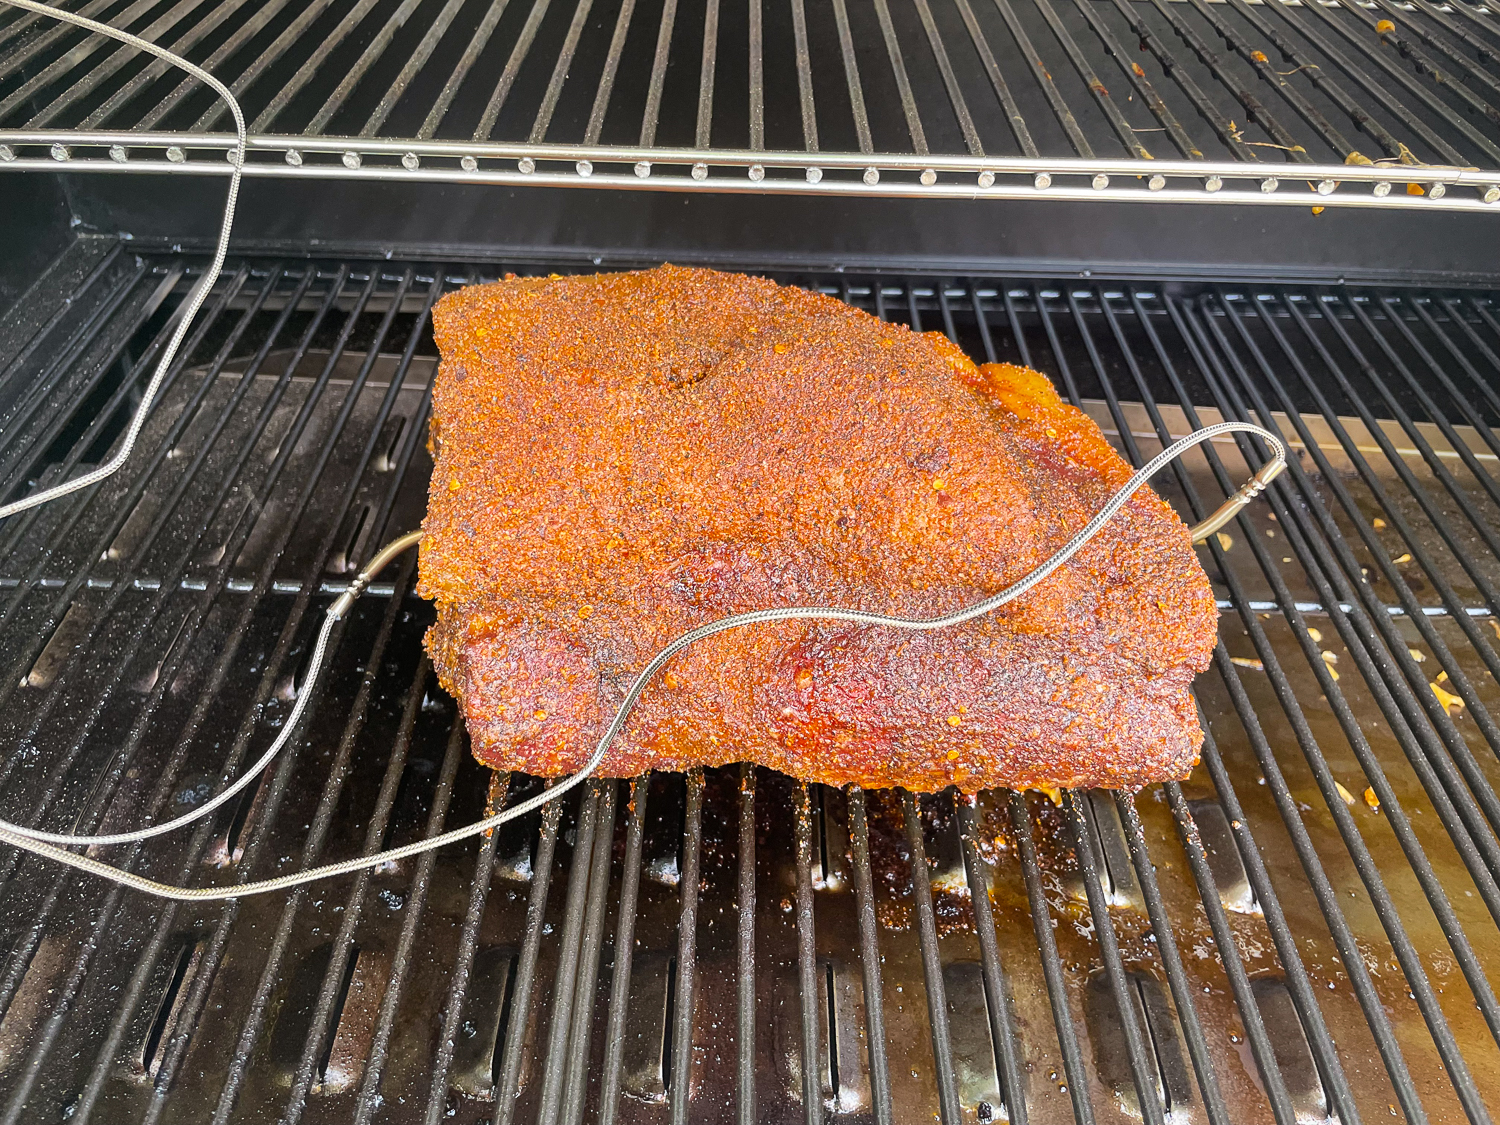 The pork shoulder has been placed in the smoker and the meat thermometer probes have been inserted into the meat.